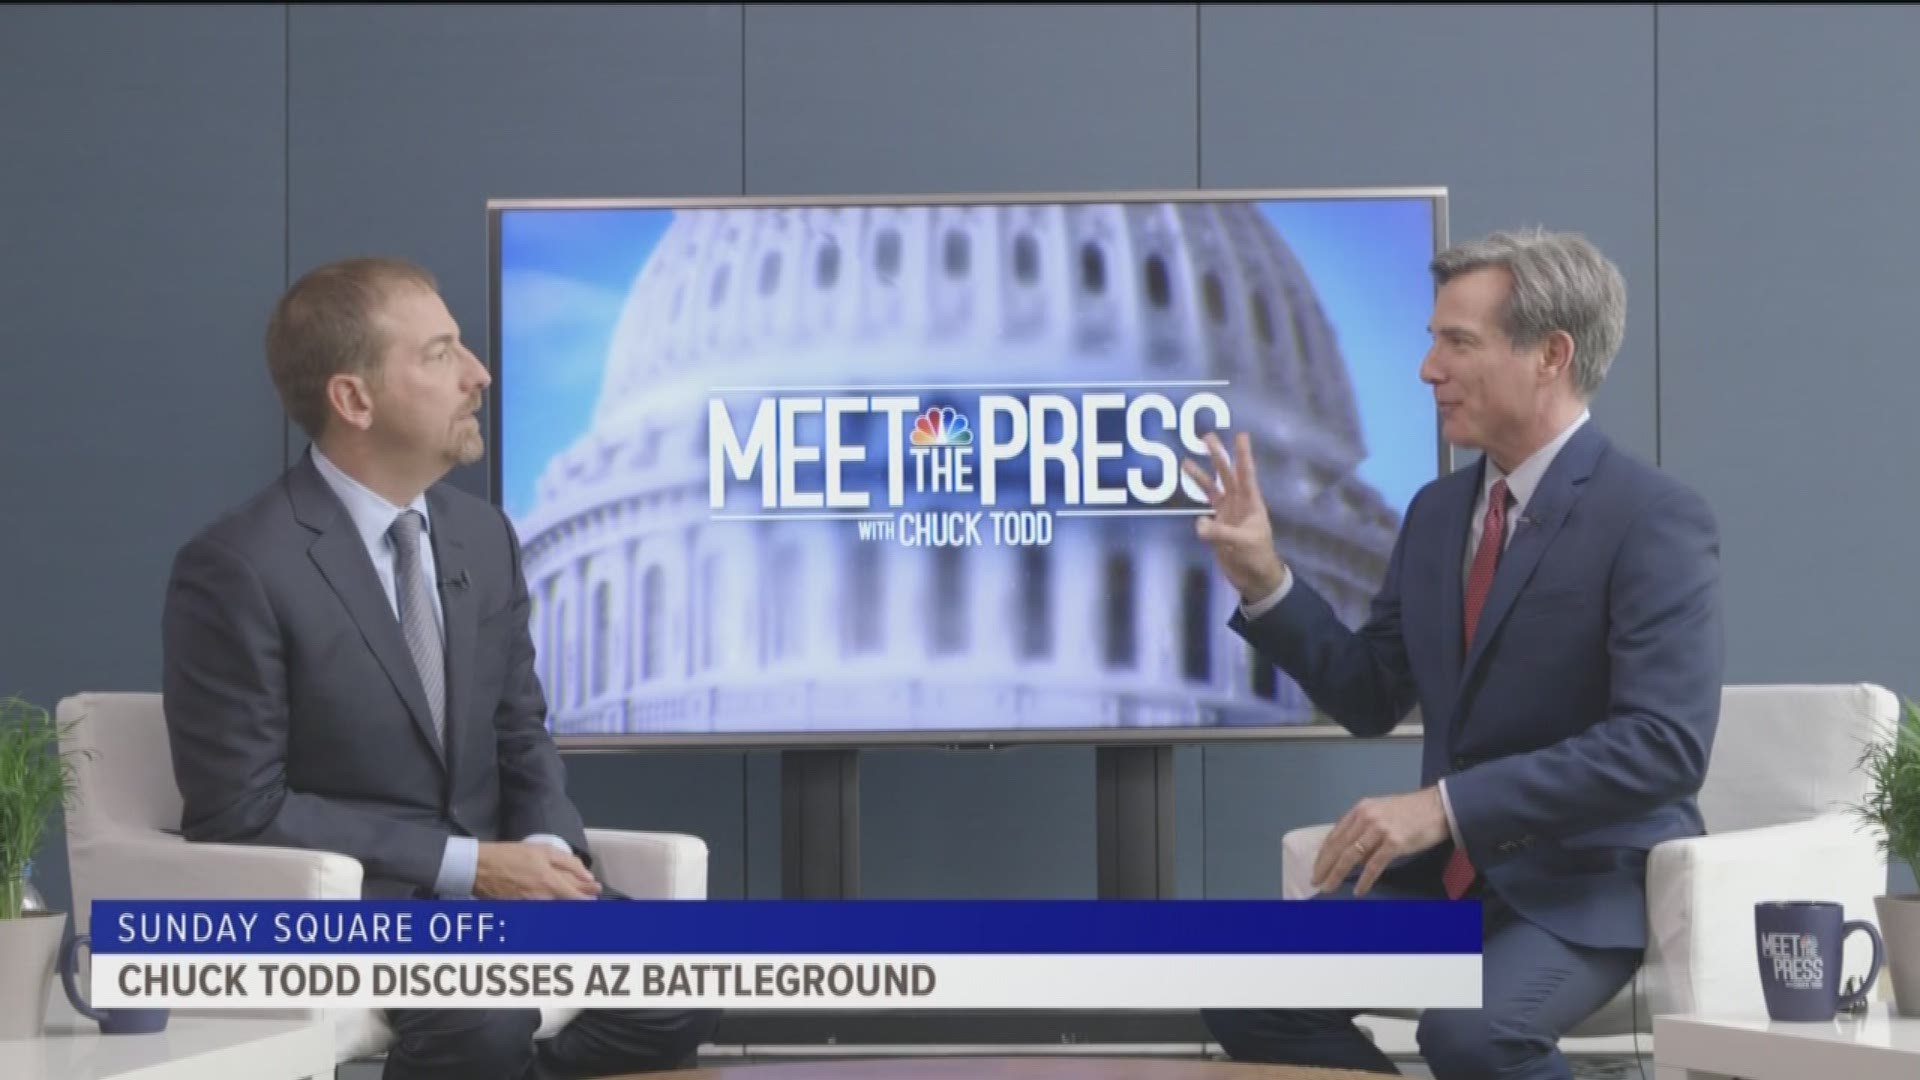 How big a role will Arizona play in the midterm elections? Does Sen. Jeff Flake really want to be president? I put those questions to "Meet the Press" moderator Chuck Todd.